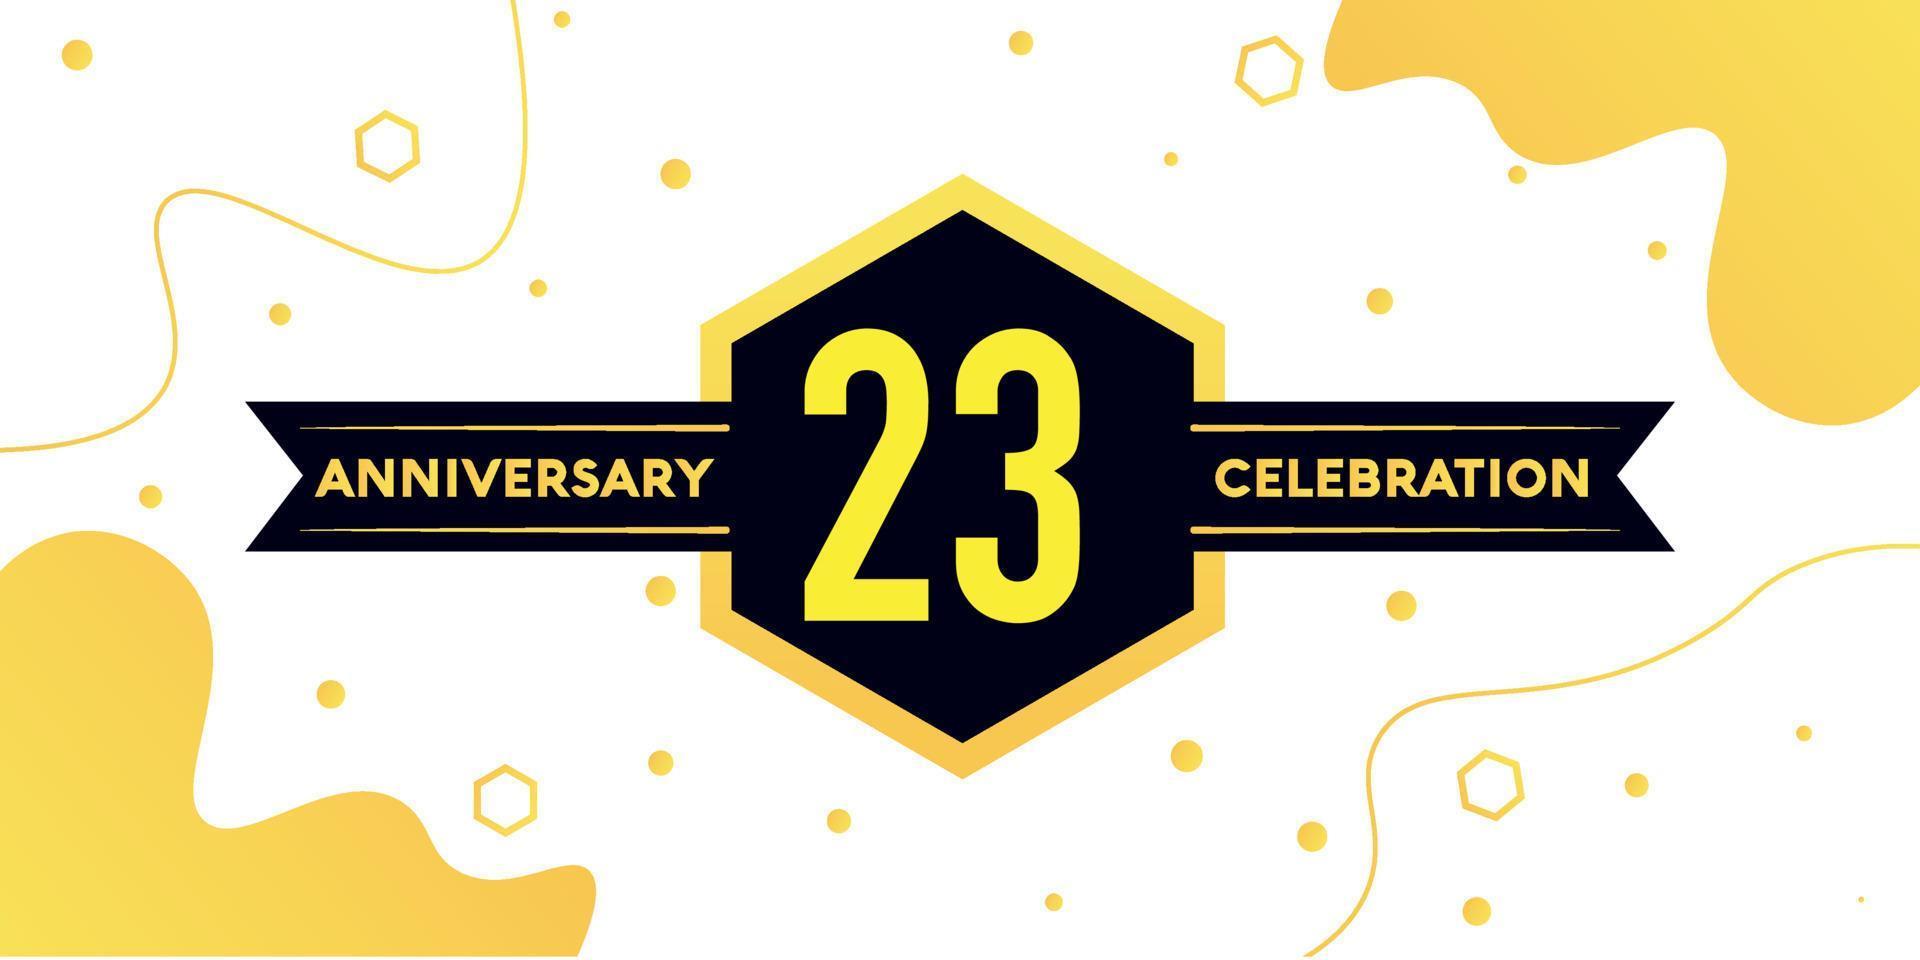 23 years anniversary logo vector design with yellow geometric shape with black and abstract design on white background template